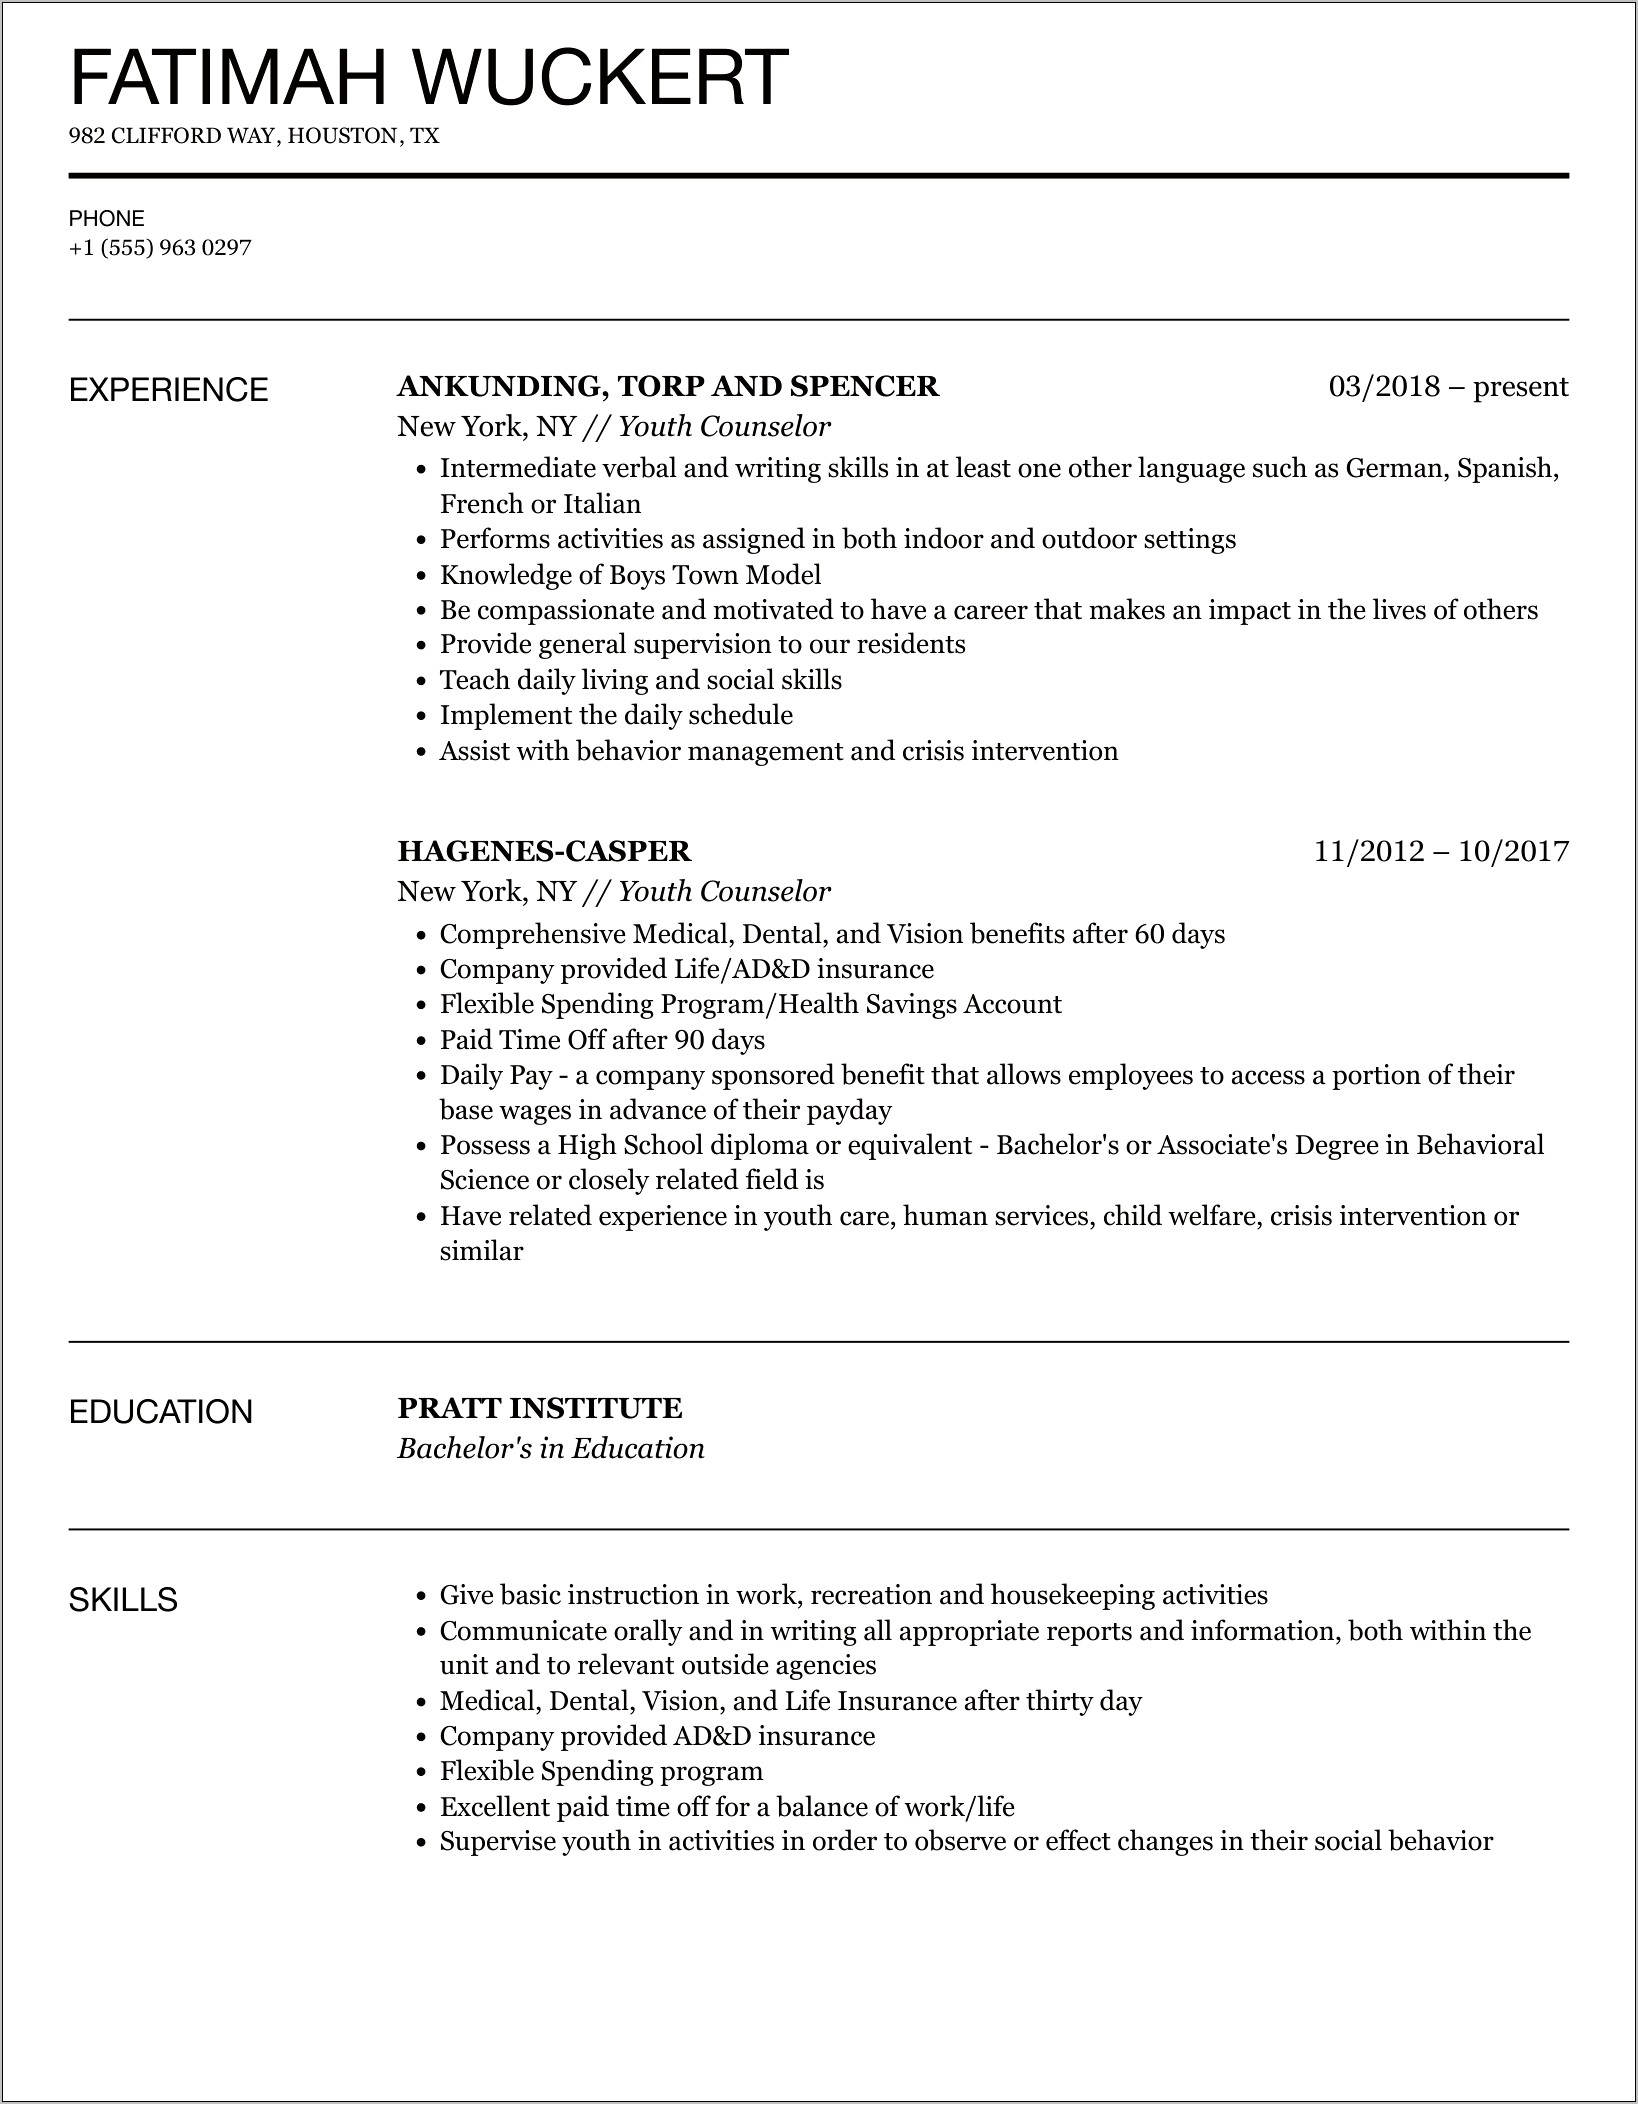 Skills For Counselors On Resume